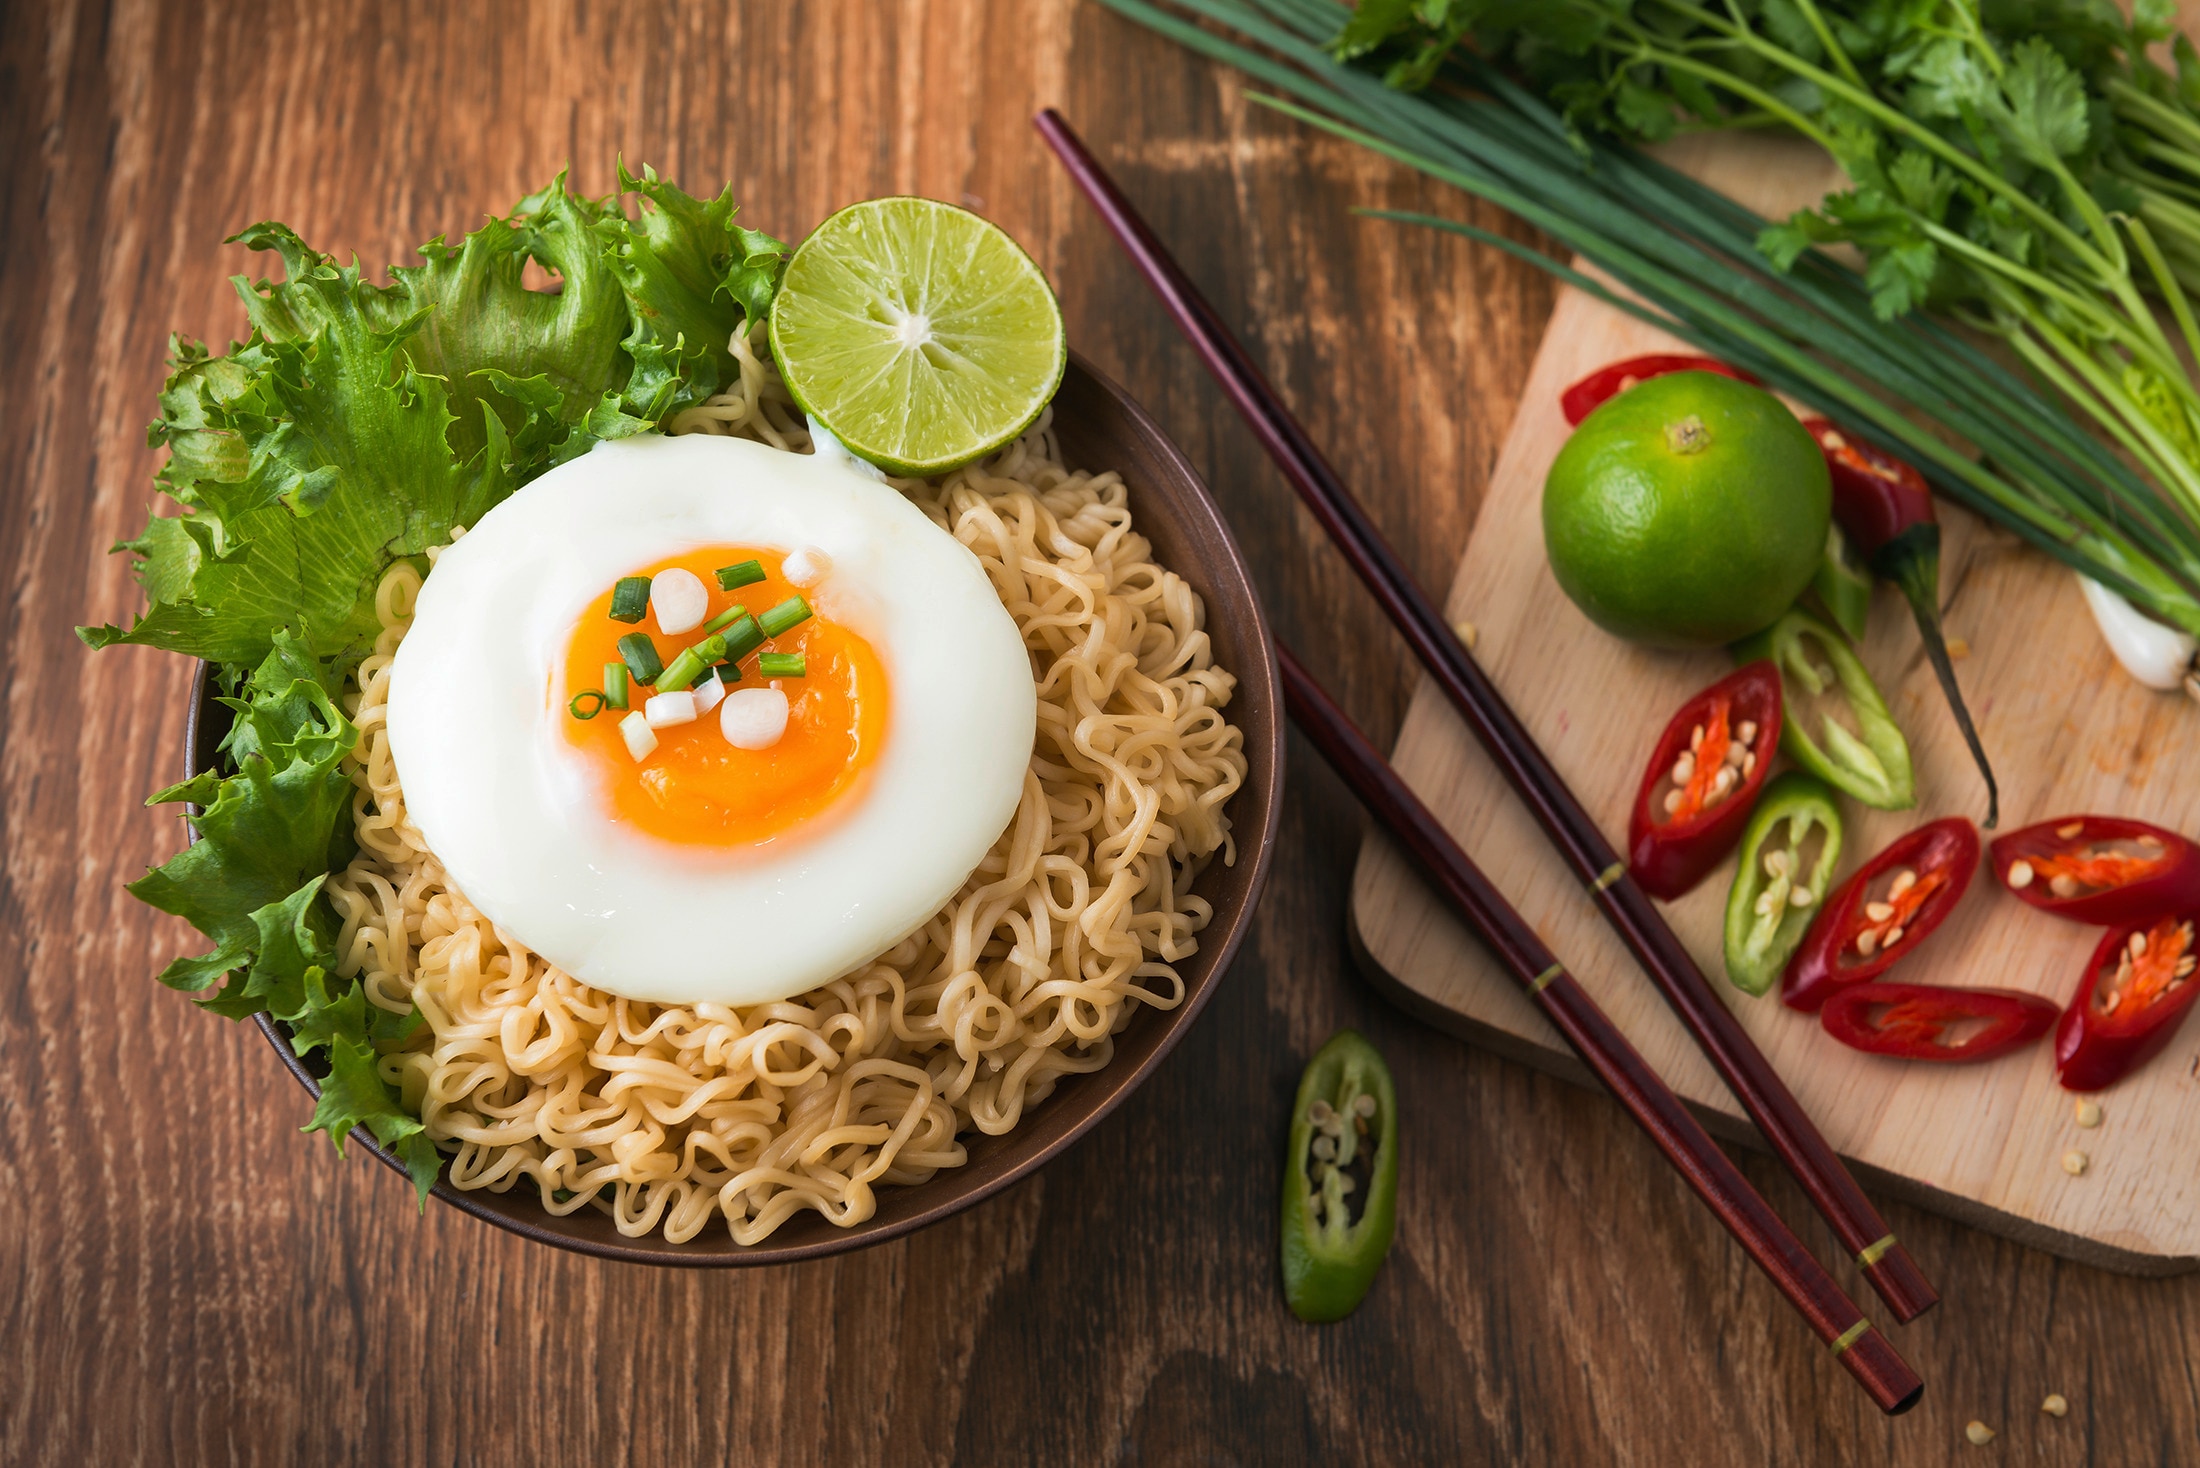 A bowl of instant noodles topped with egg and served with limes